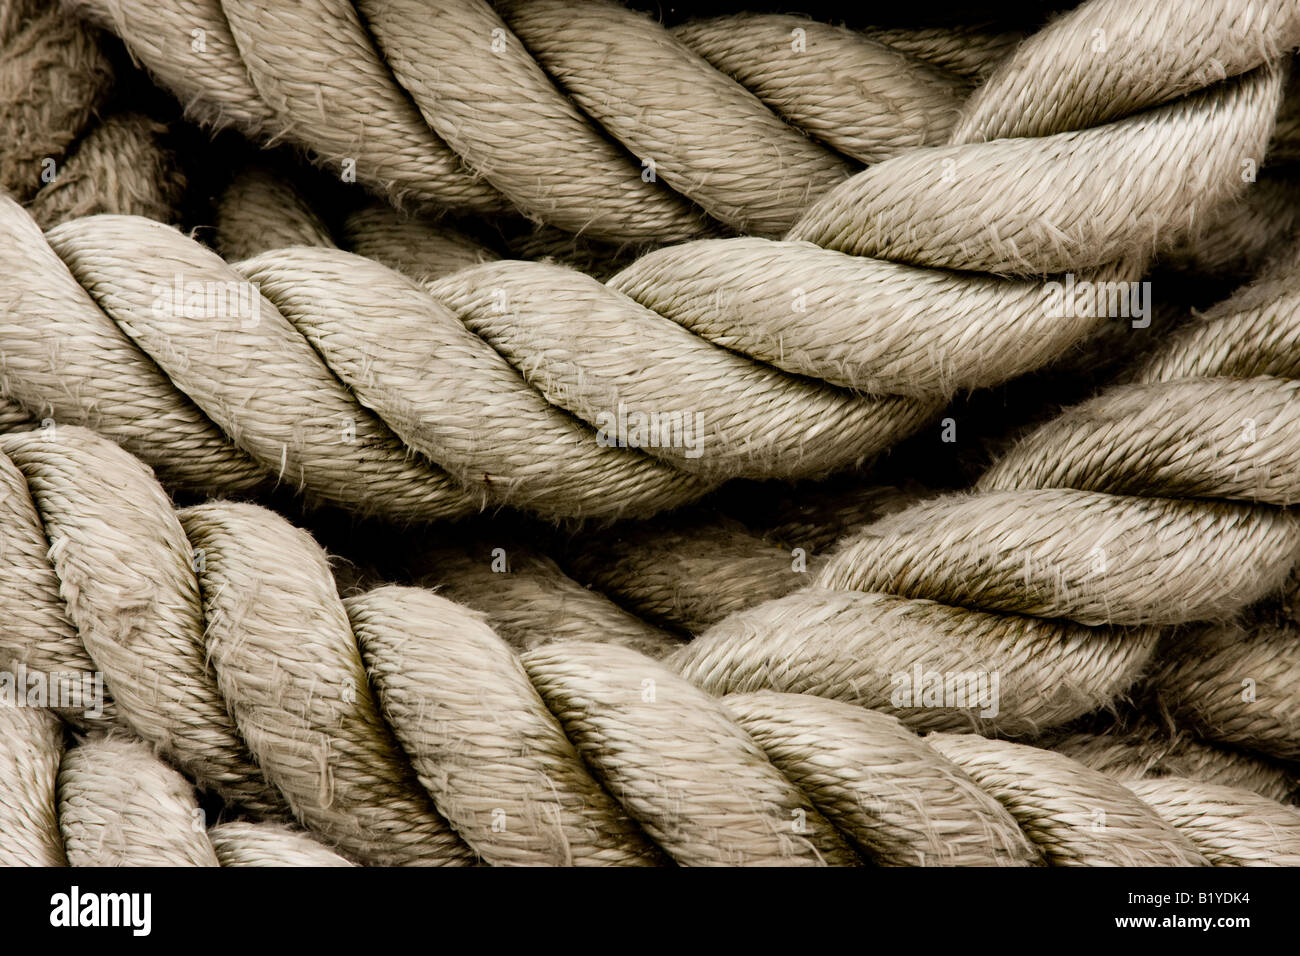 Photo by Tiffany Lines, - Nautical Rope